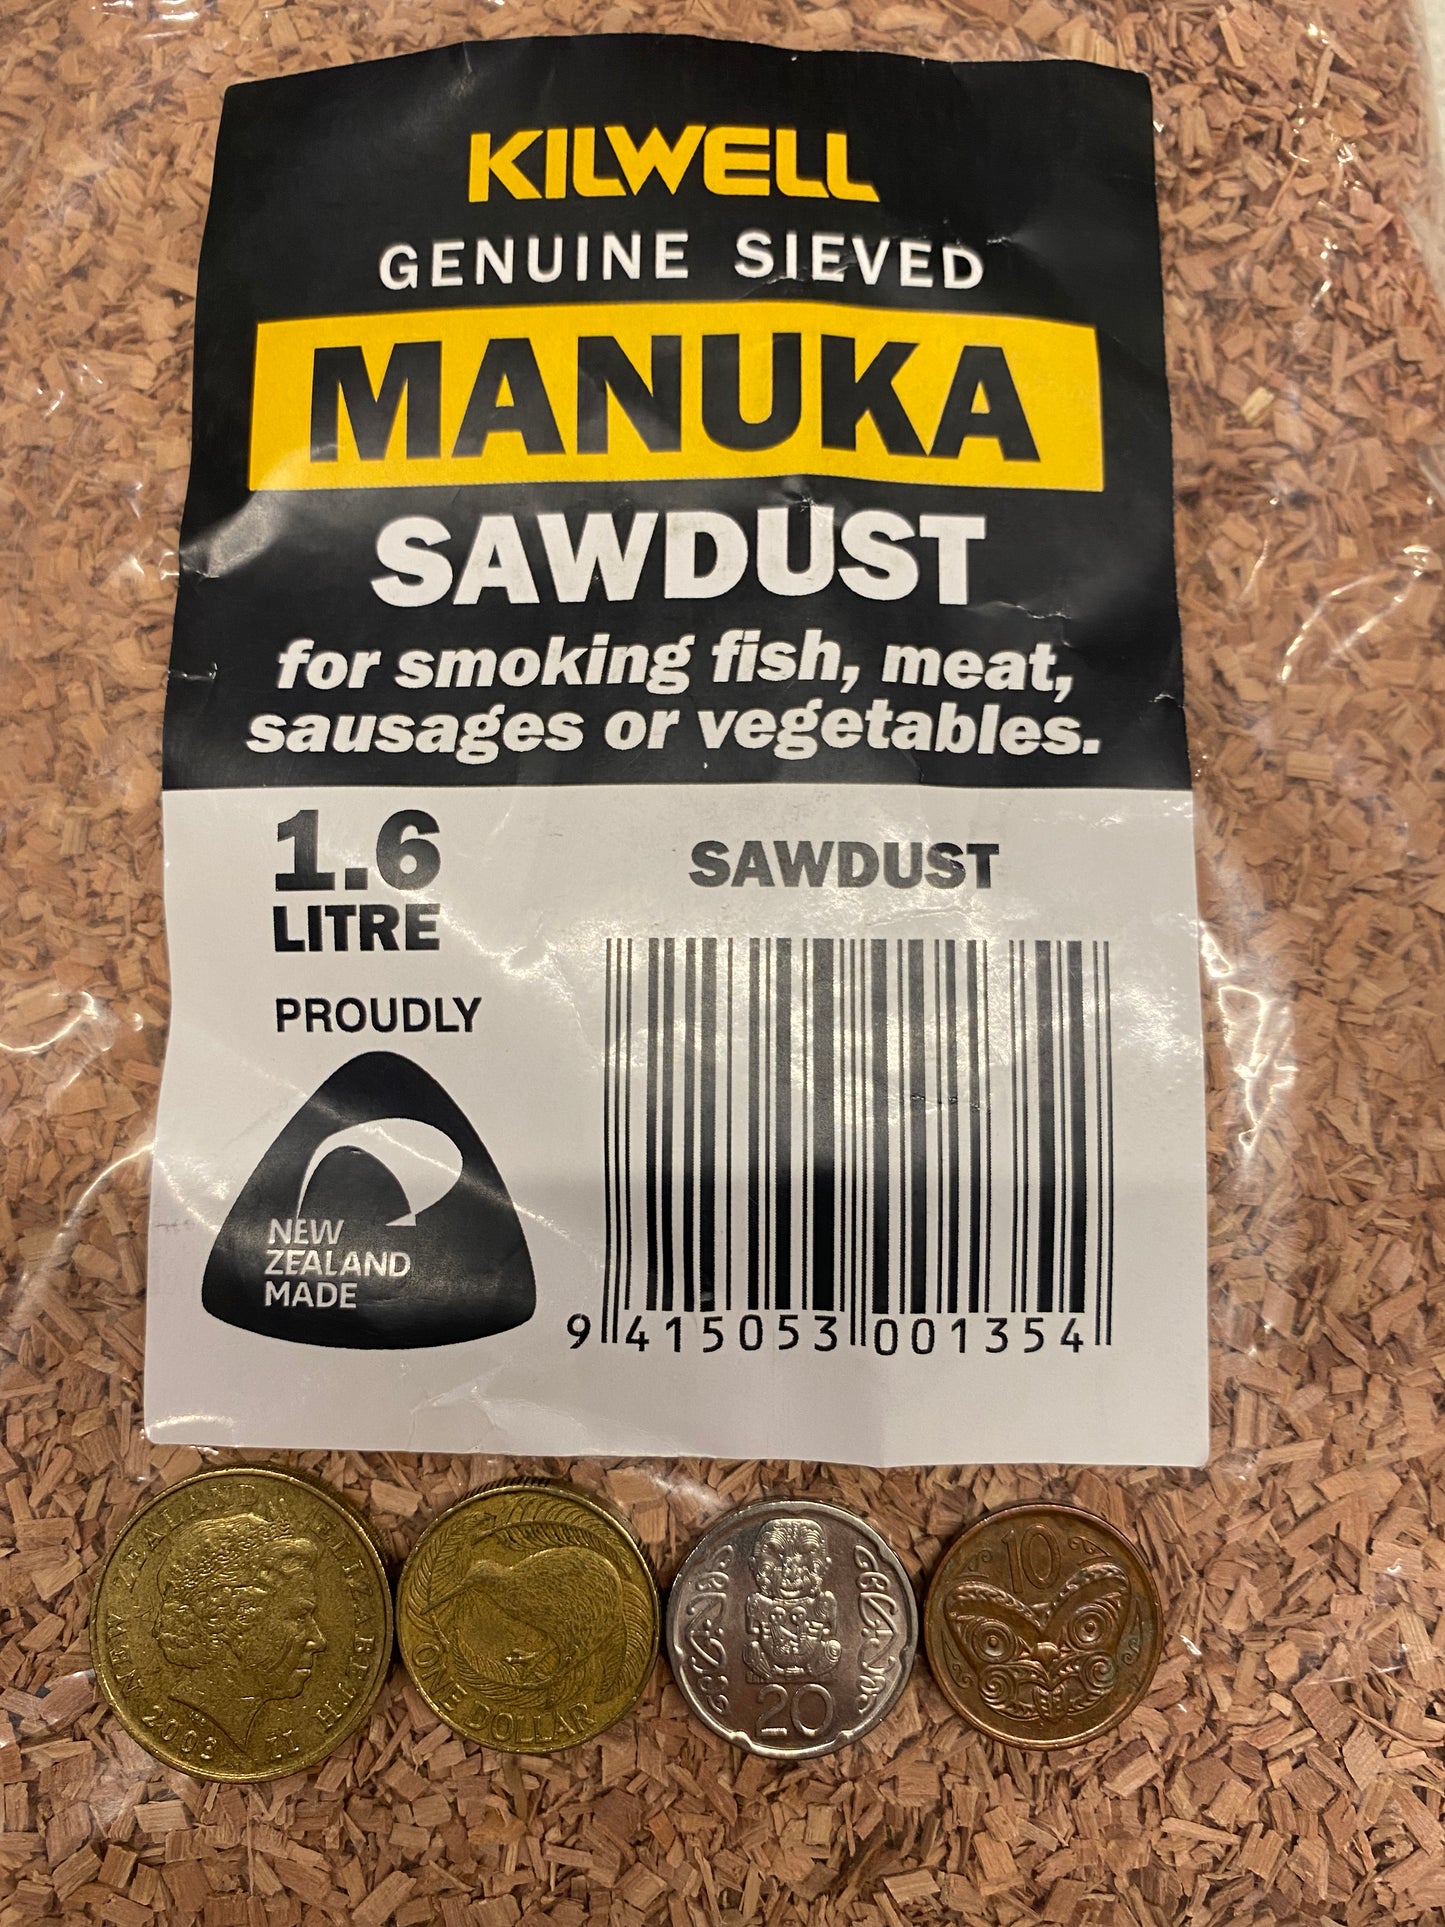 Manuka Sawdust for smoking fish, meat, sausages or vegetables